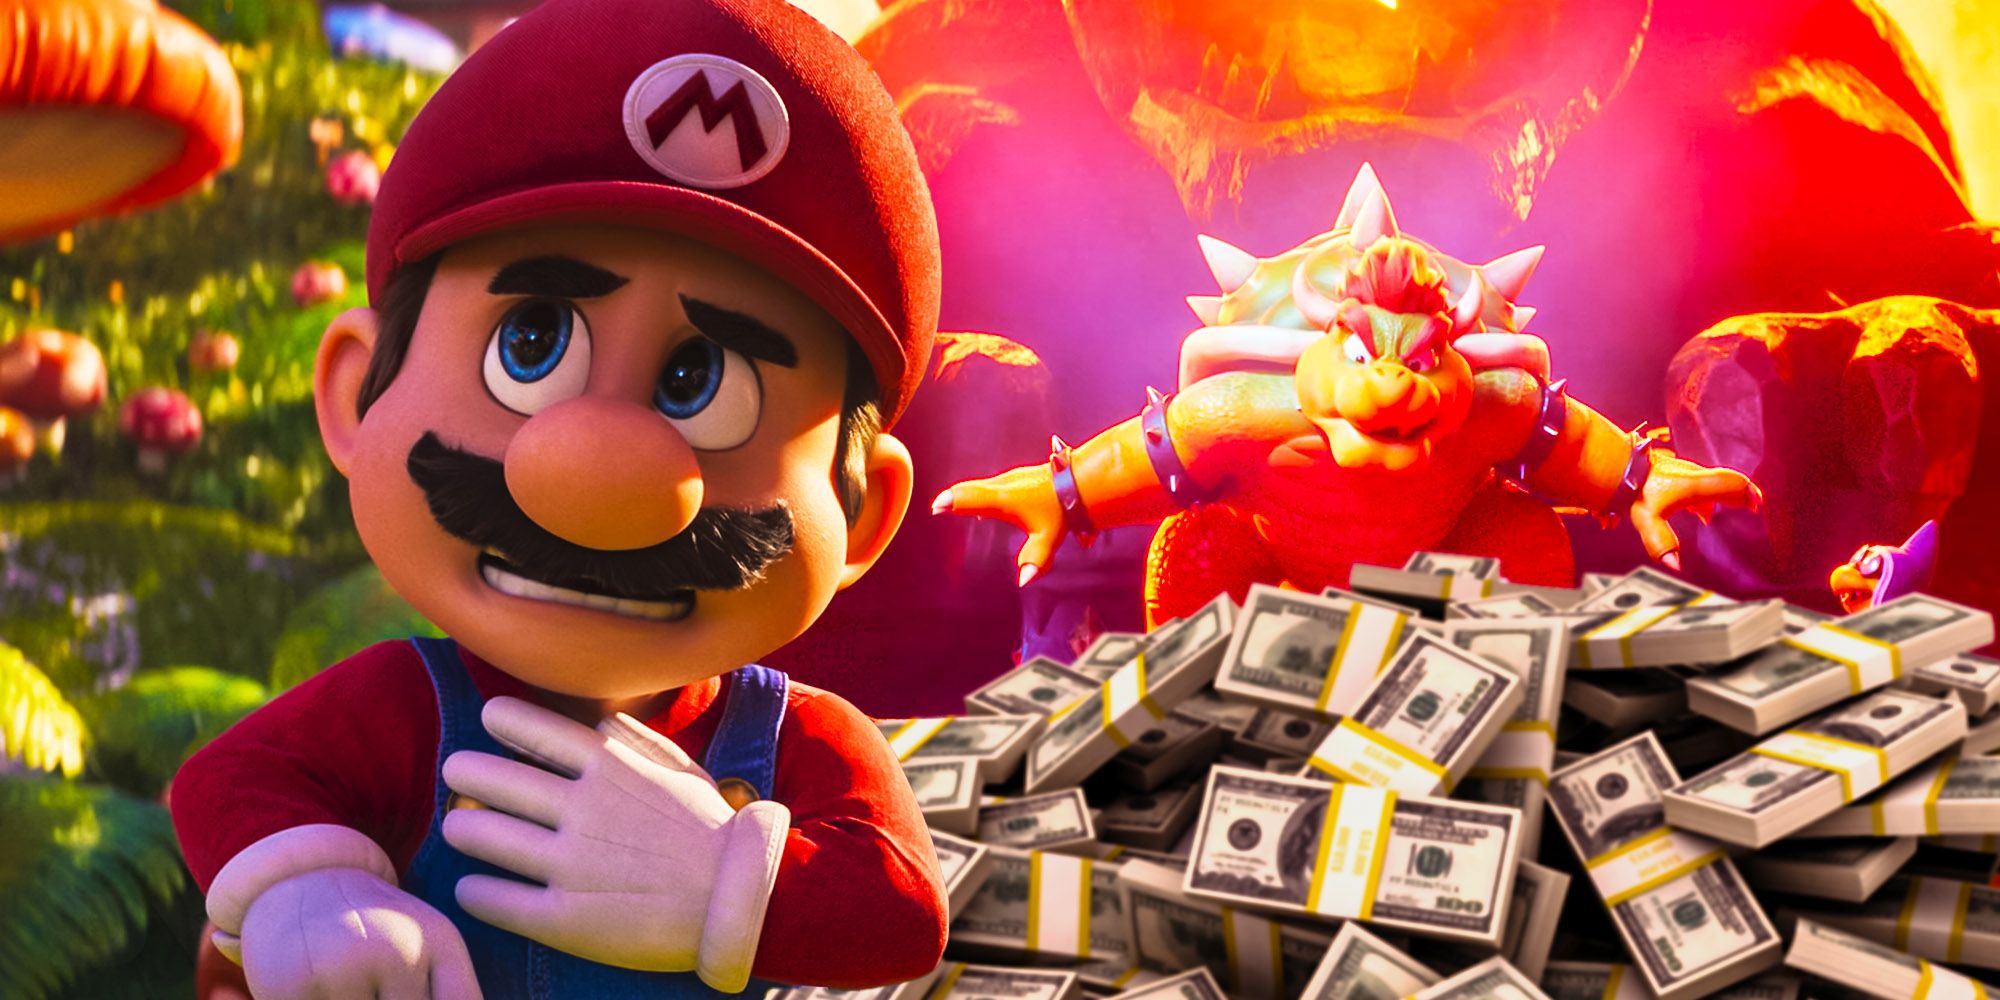 Super mario bros movie Mario looking scared with Bowser on top of money